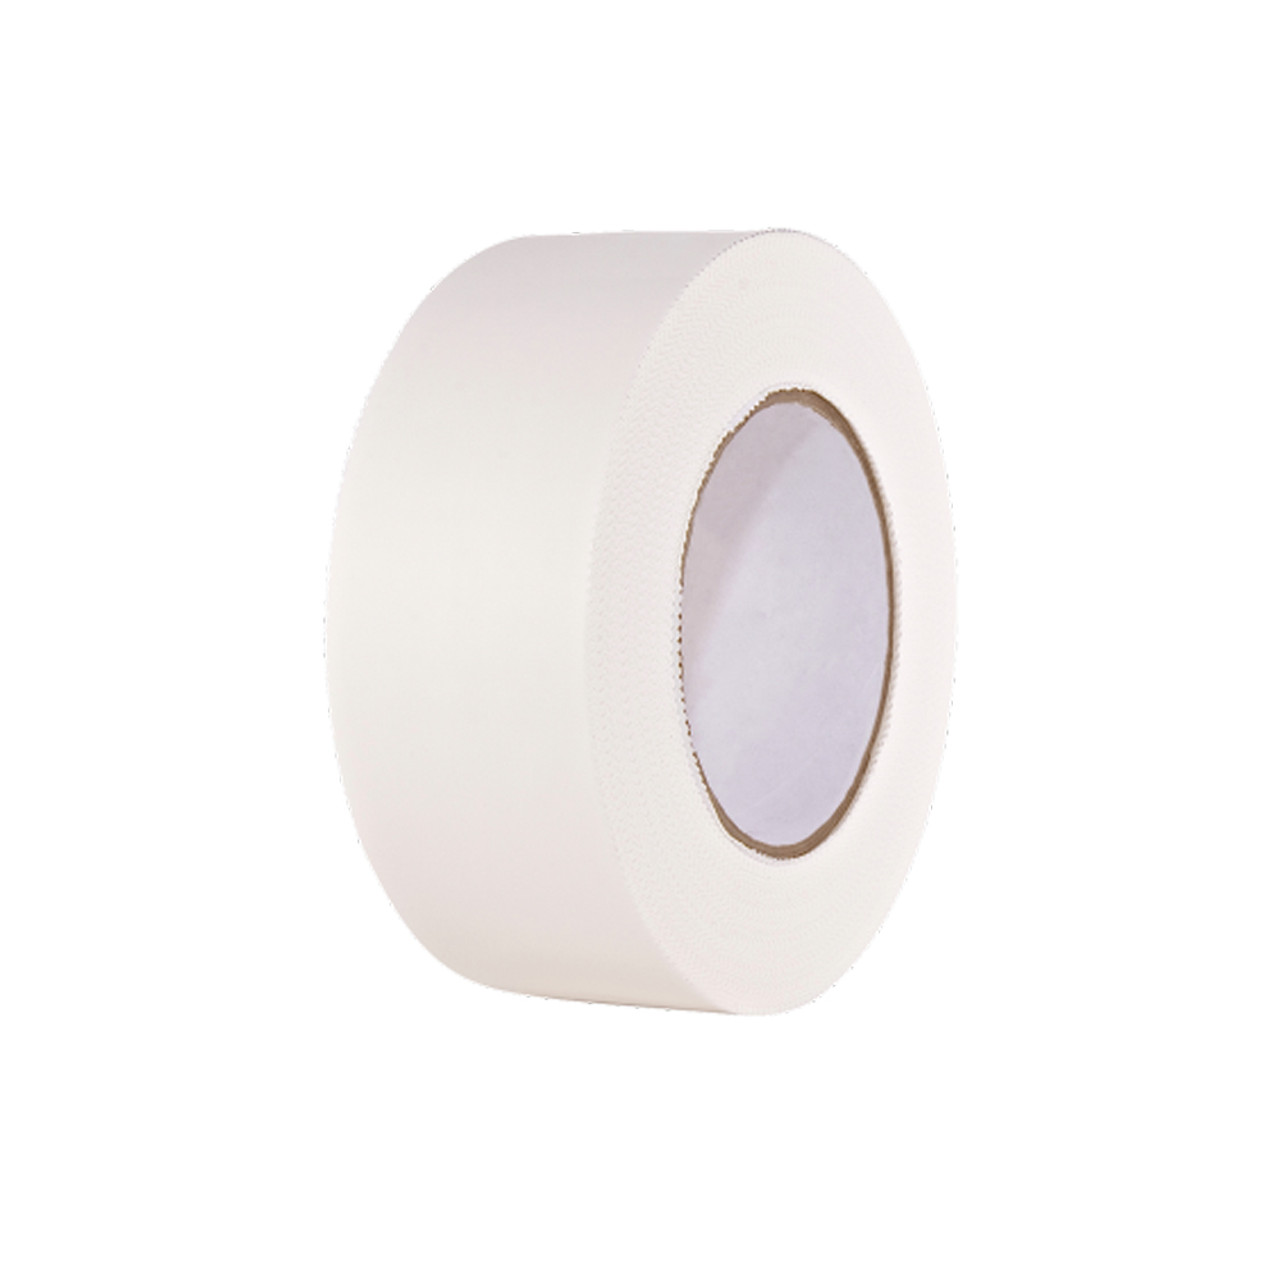 White Close-Up Tape- 2/ 4 Wide